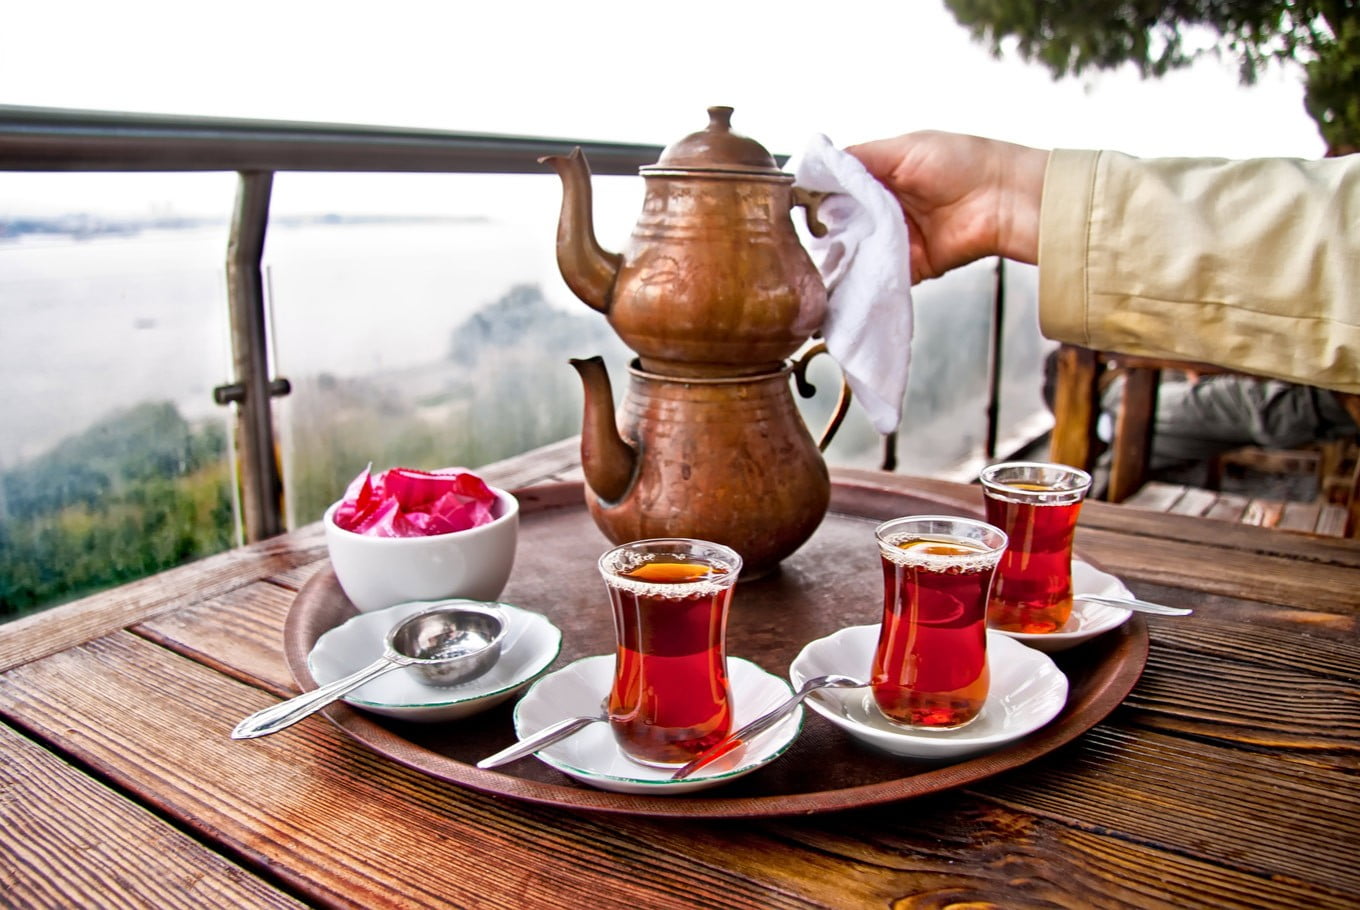 In love with Turkish coffee or Turkish cuisine? Here is a food lover’s guide to experiencing the flavours of Turkey